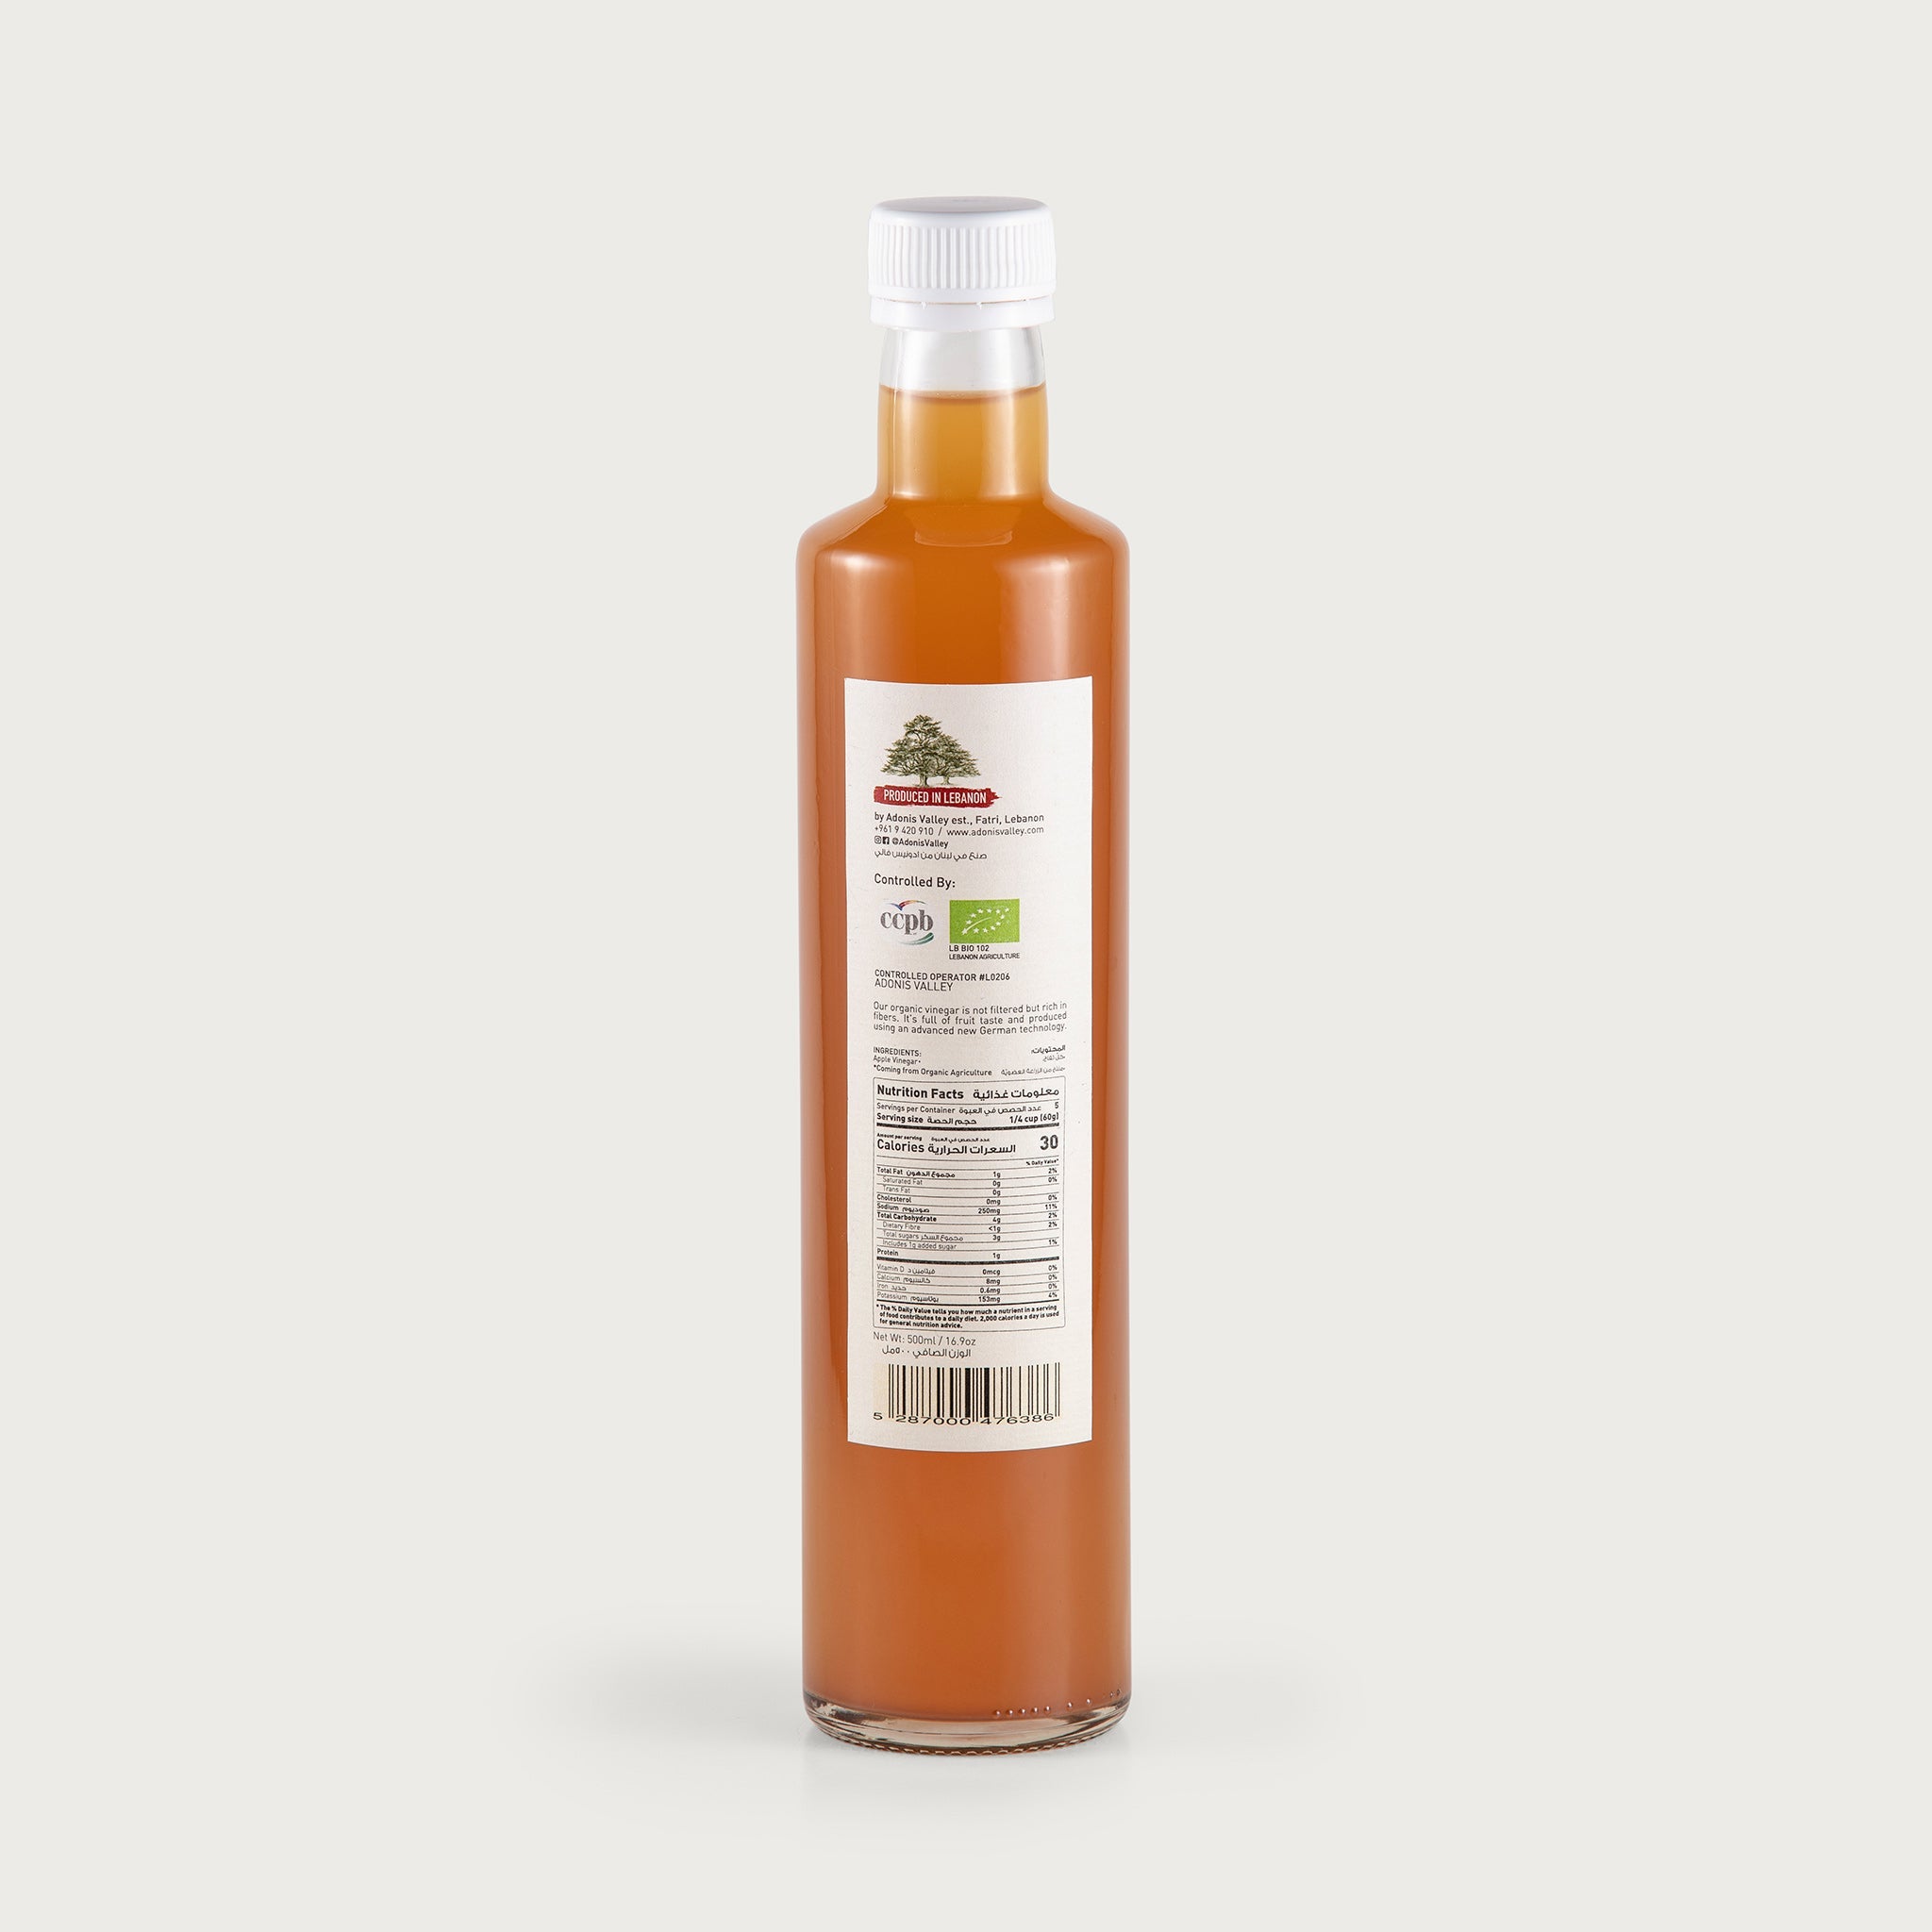 A tall 17 oz. clear bottle shows the rich, golden amber colored apple vinegar. The label is white with an illustration of apples on a branch. The label denotes this product is not filtered.